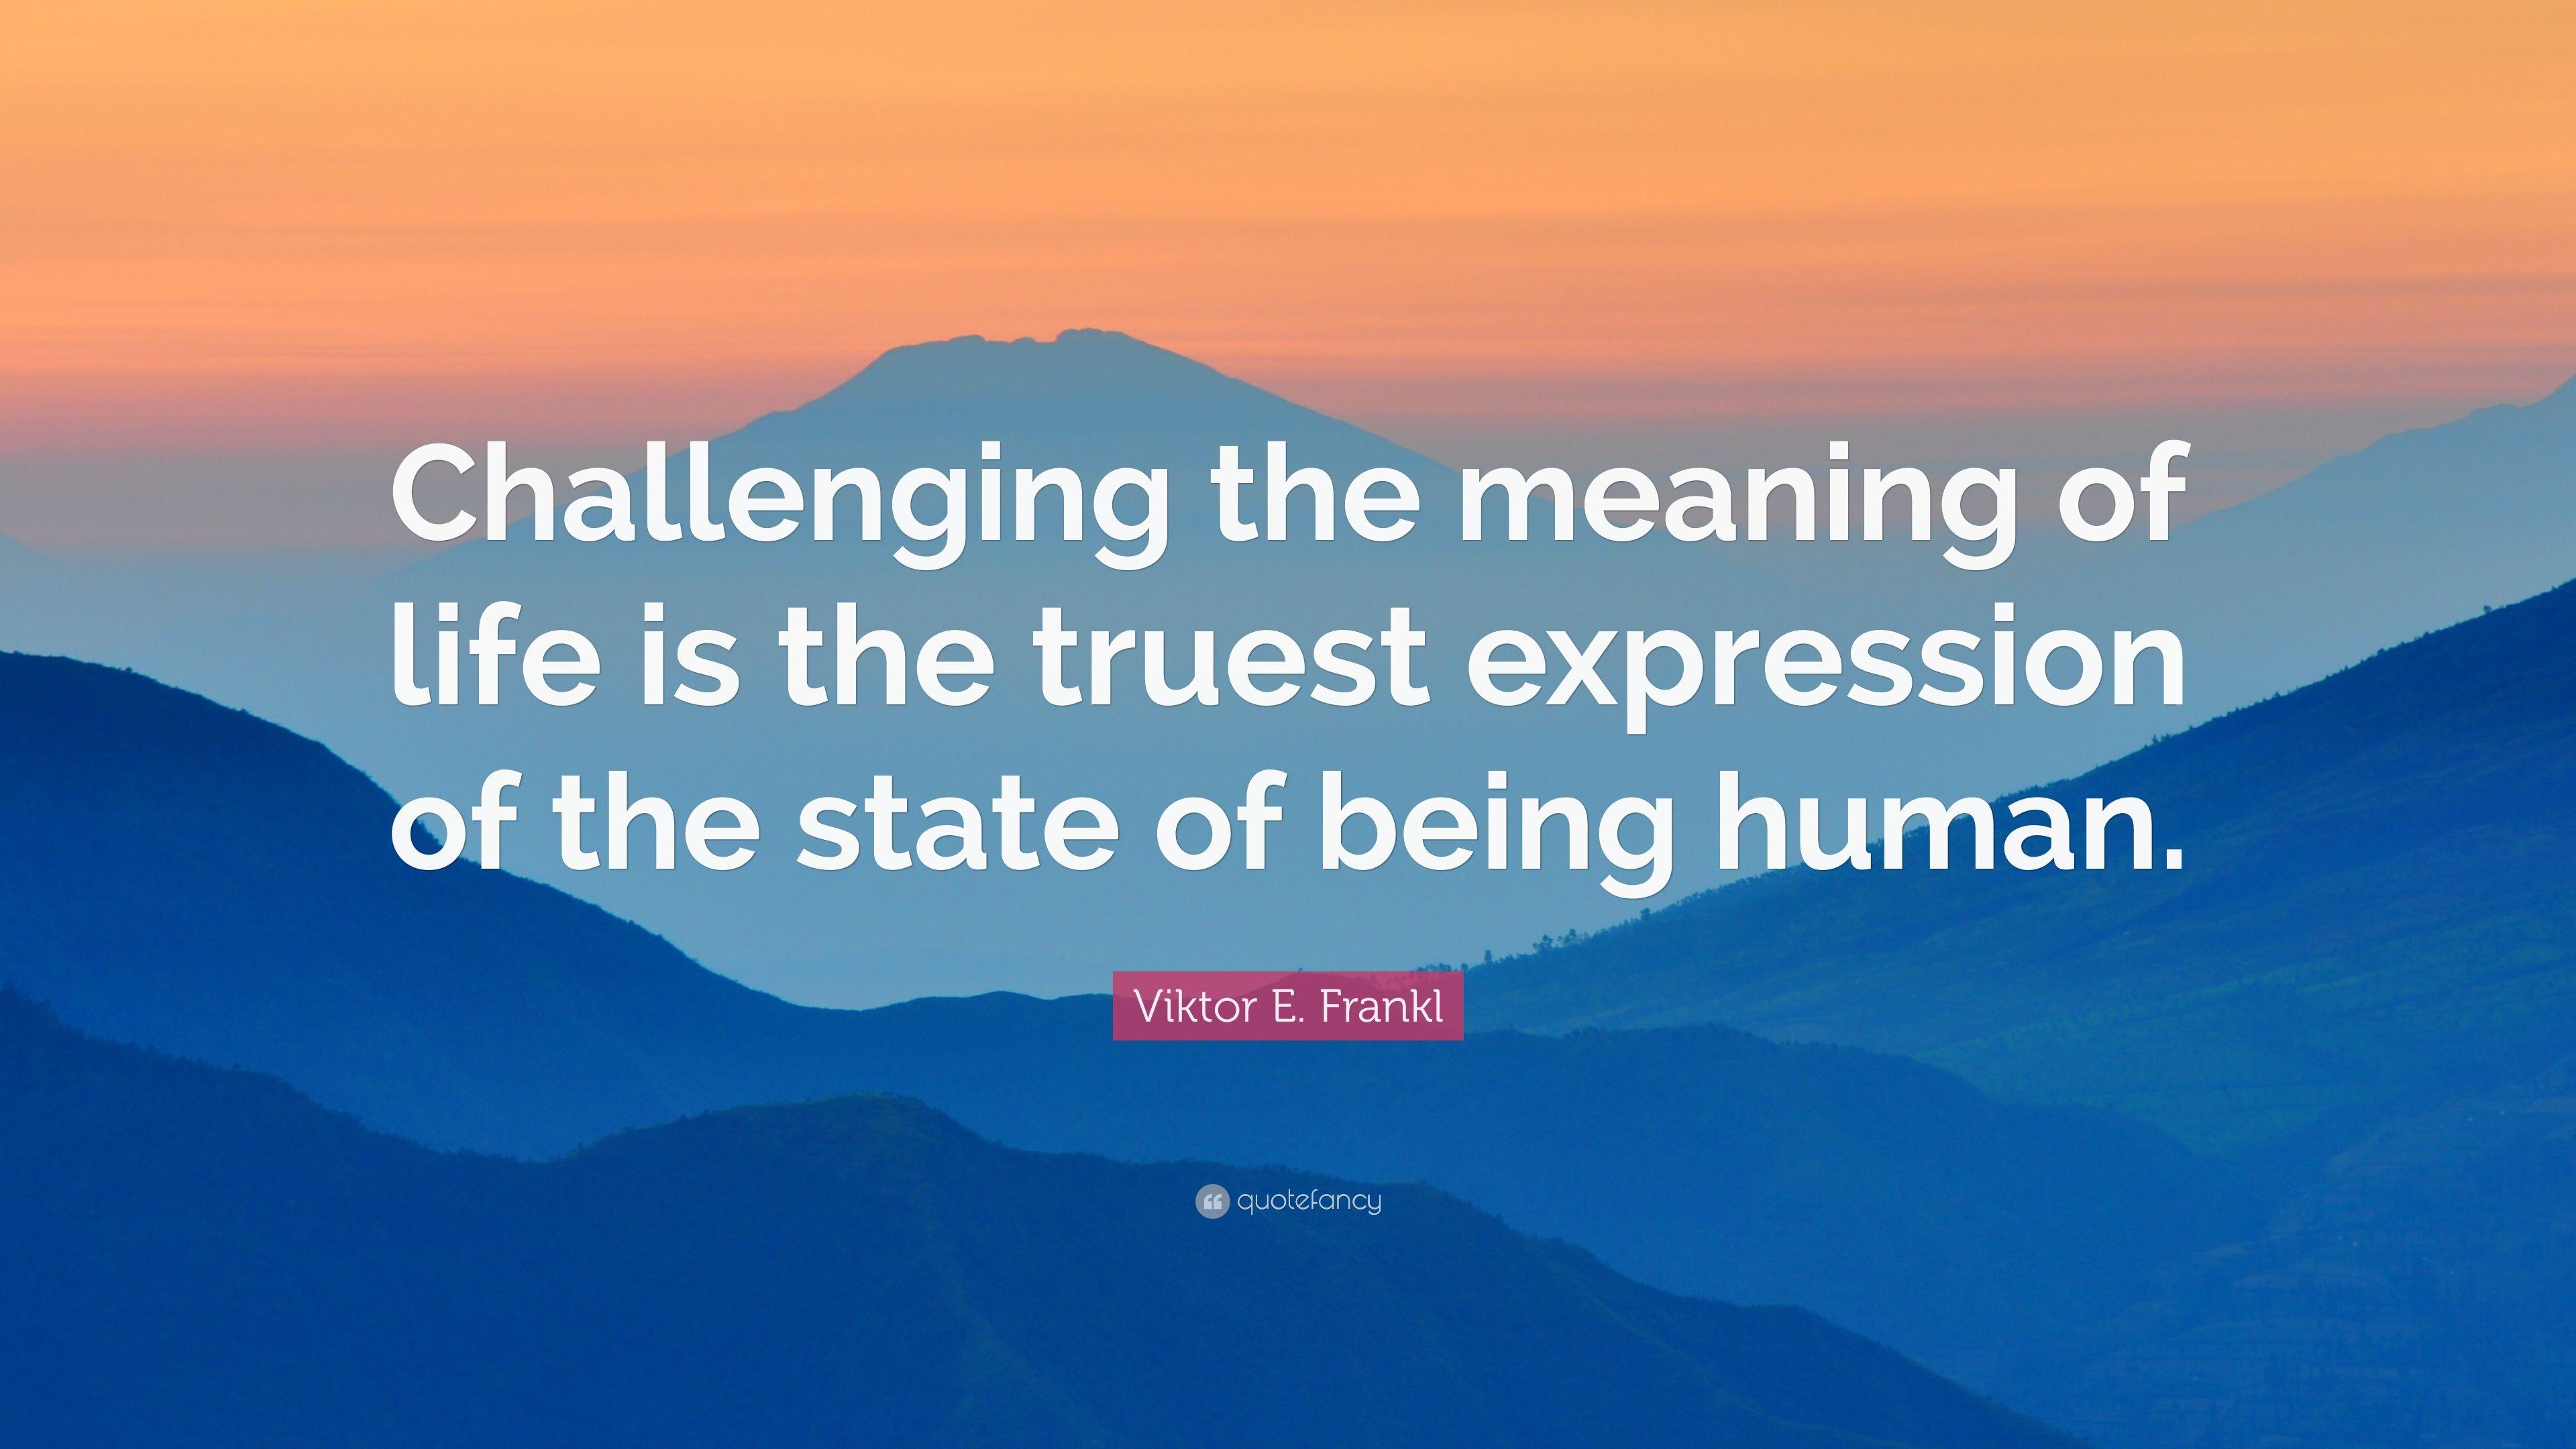 Viktor E. Frankl Quote: “Challenging the meaning of life is